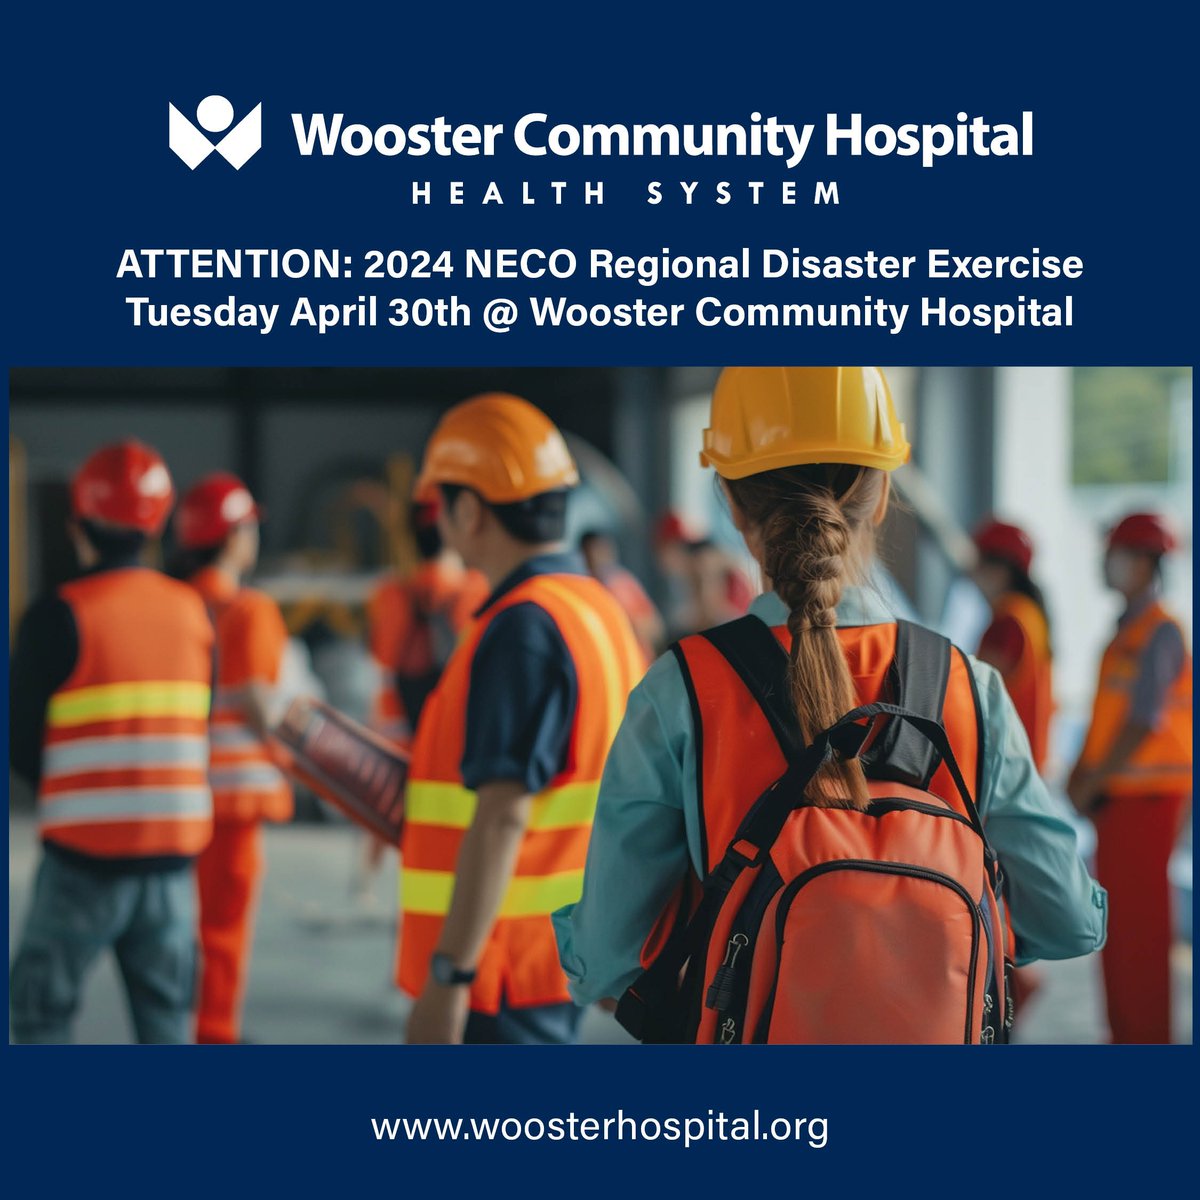 Tuesday, April 30th, WCH will be participating in a Regional Disaster exercise. We will be partnering with local EMS and will be utilizing live actors/actresses as patients. This training is to help prepare hospital staff for when real patient emergencies occur. #WCHCare